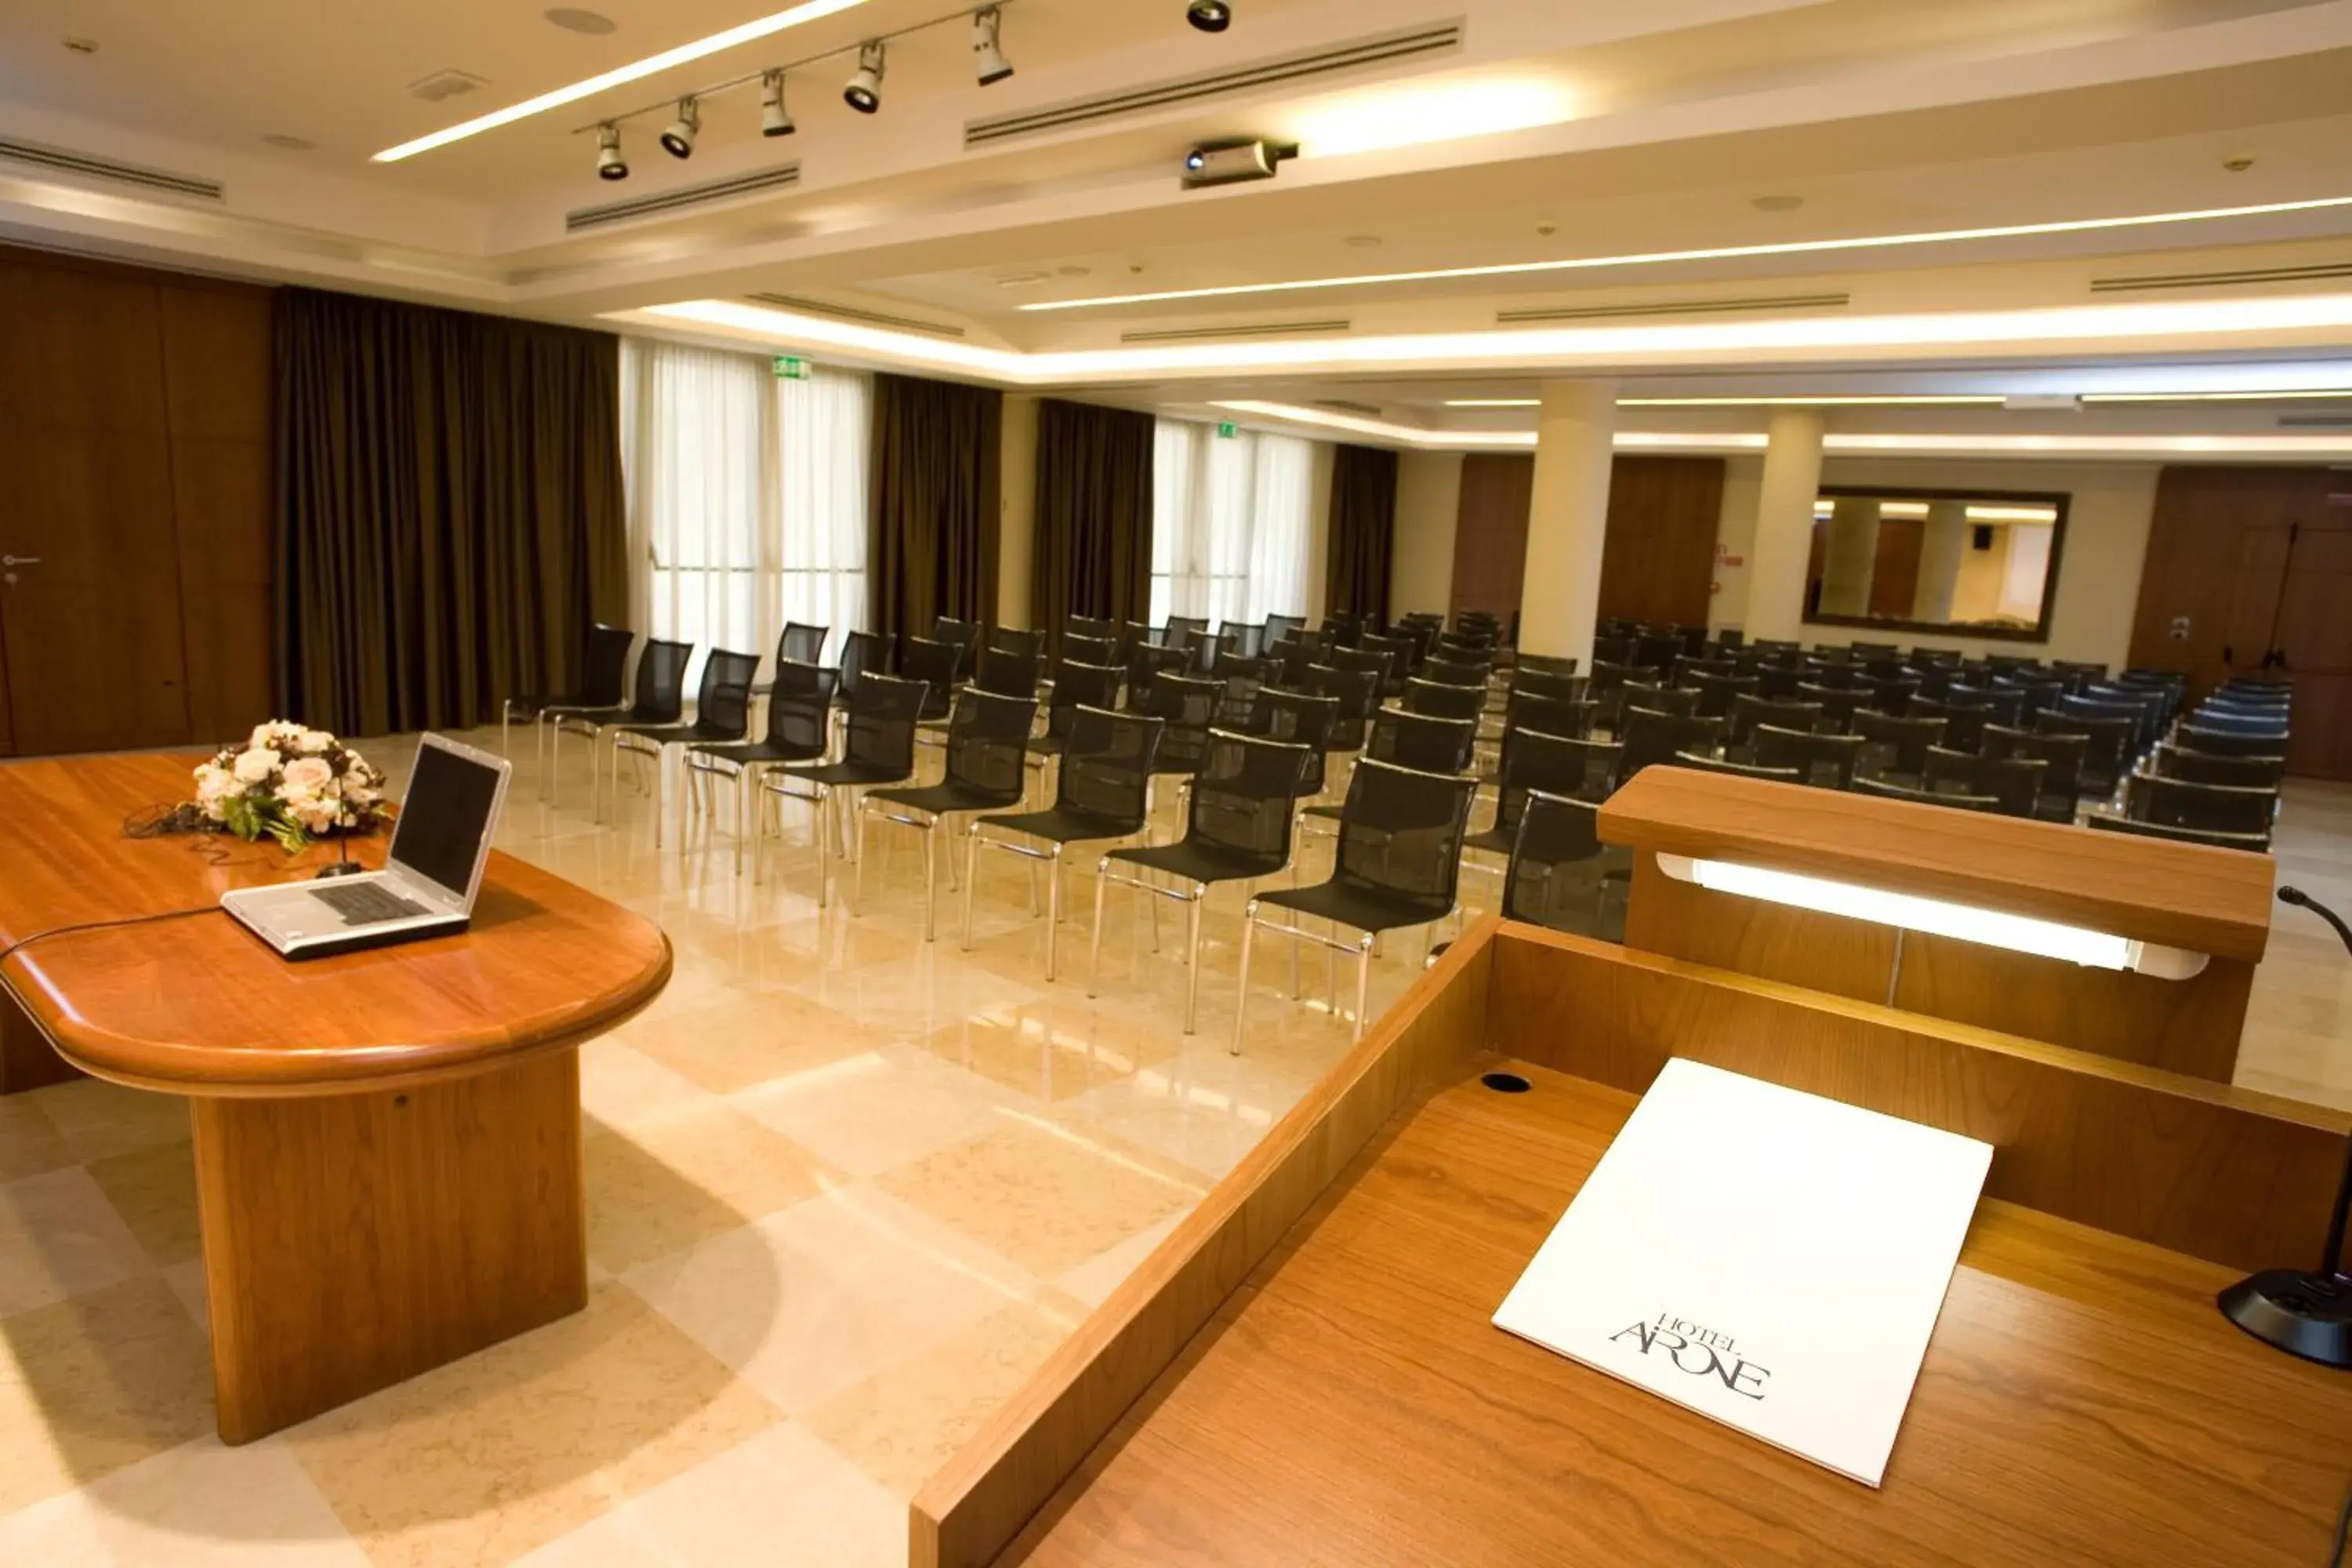 Business facilities in Hotel Airone